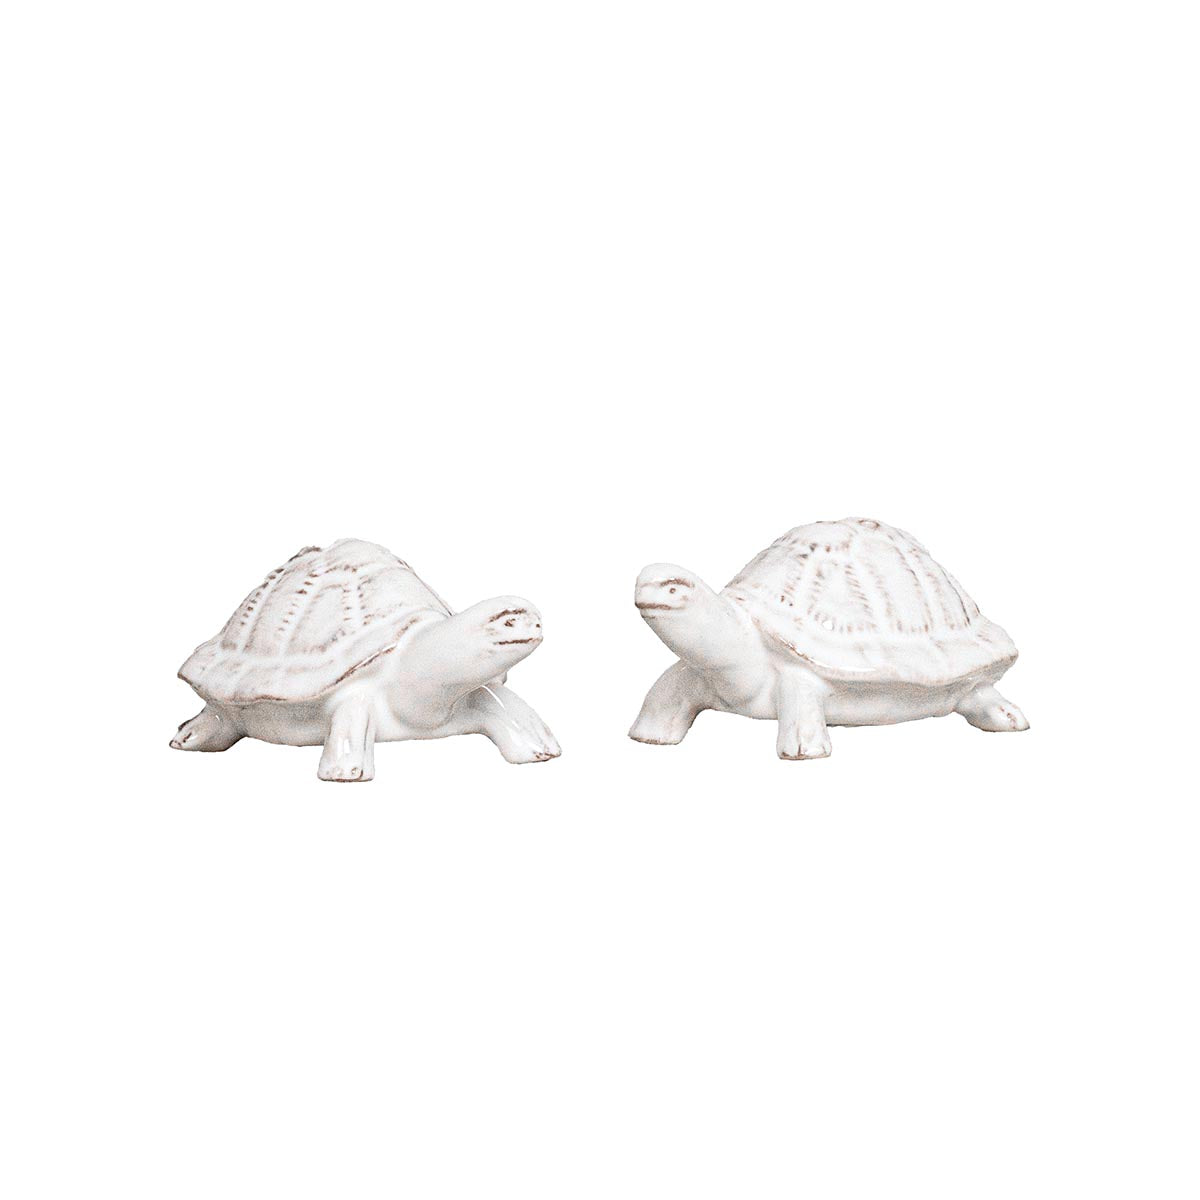 Clever Creatures Turtle Salt and Pepper